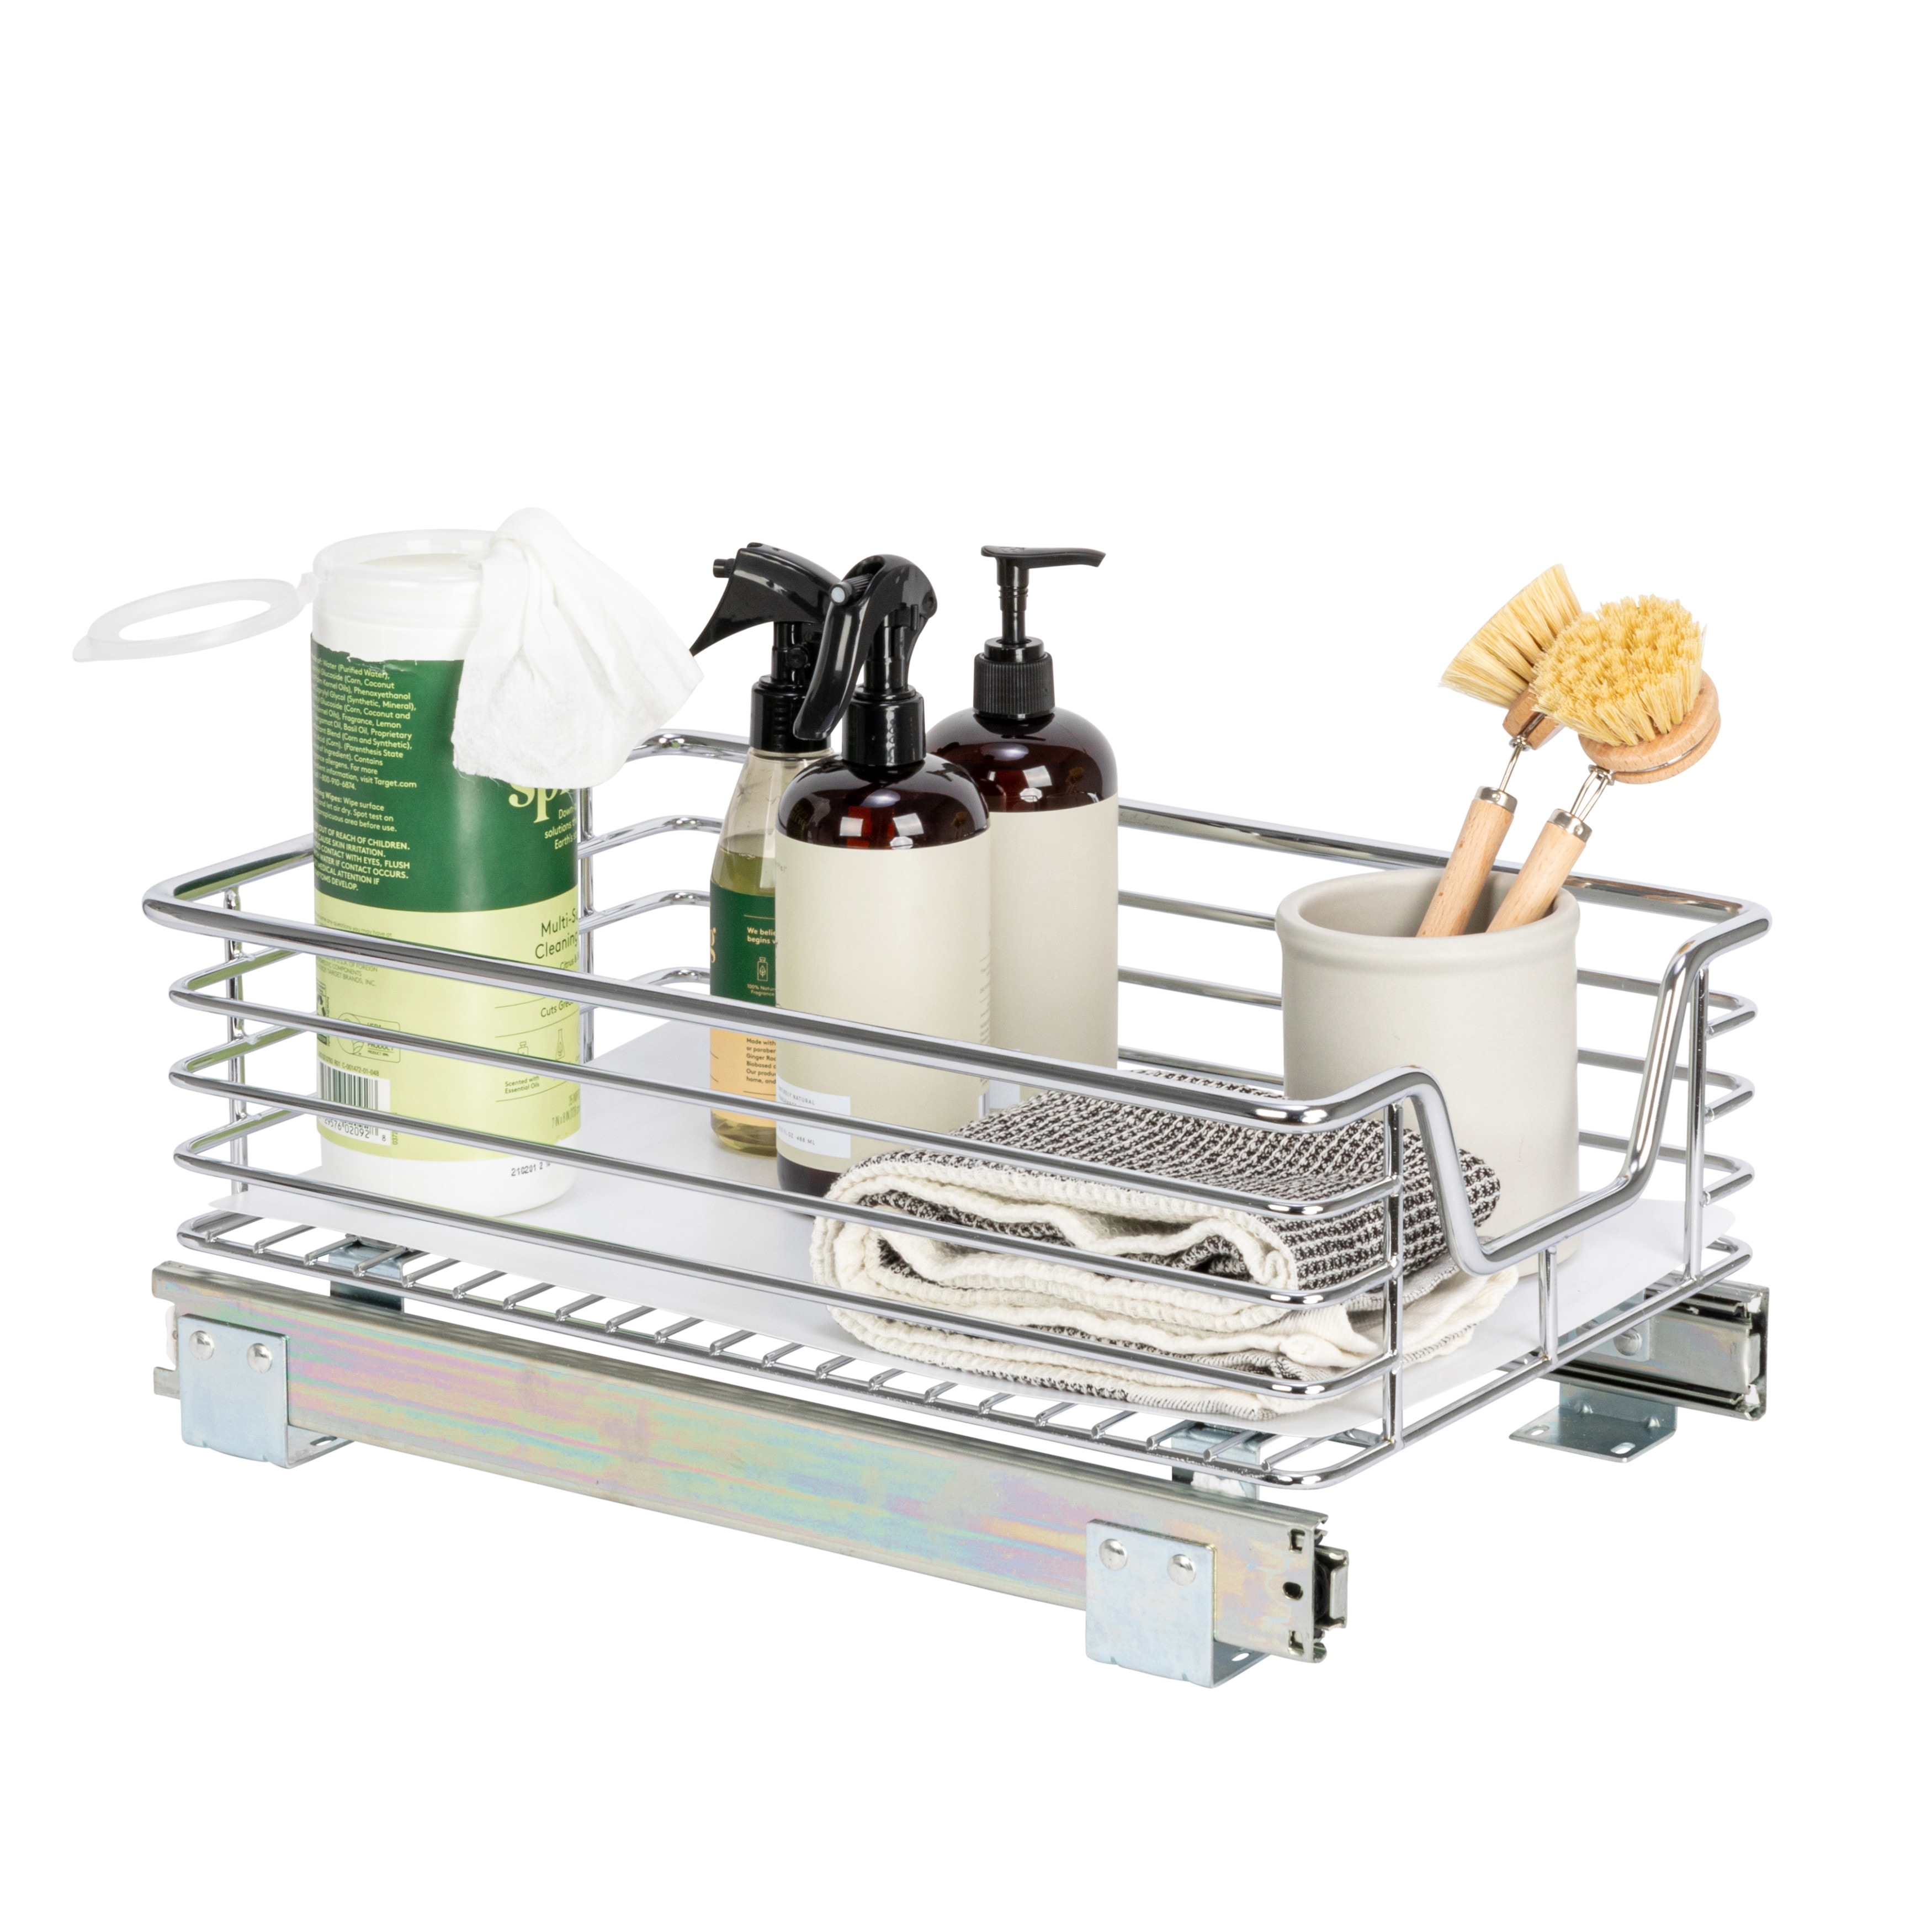 Household Essentials Glidez Multipurpose Chrome-Plated Steel  Pull-Out/Slide-Out Storage Organizer for Under Sink or Under Cabinet Use -  2-Tier Design